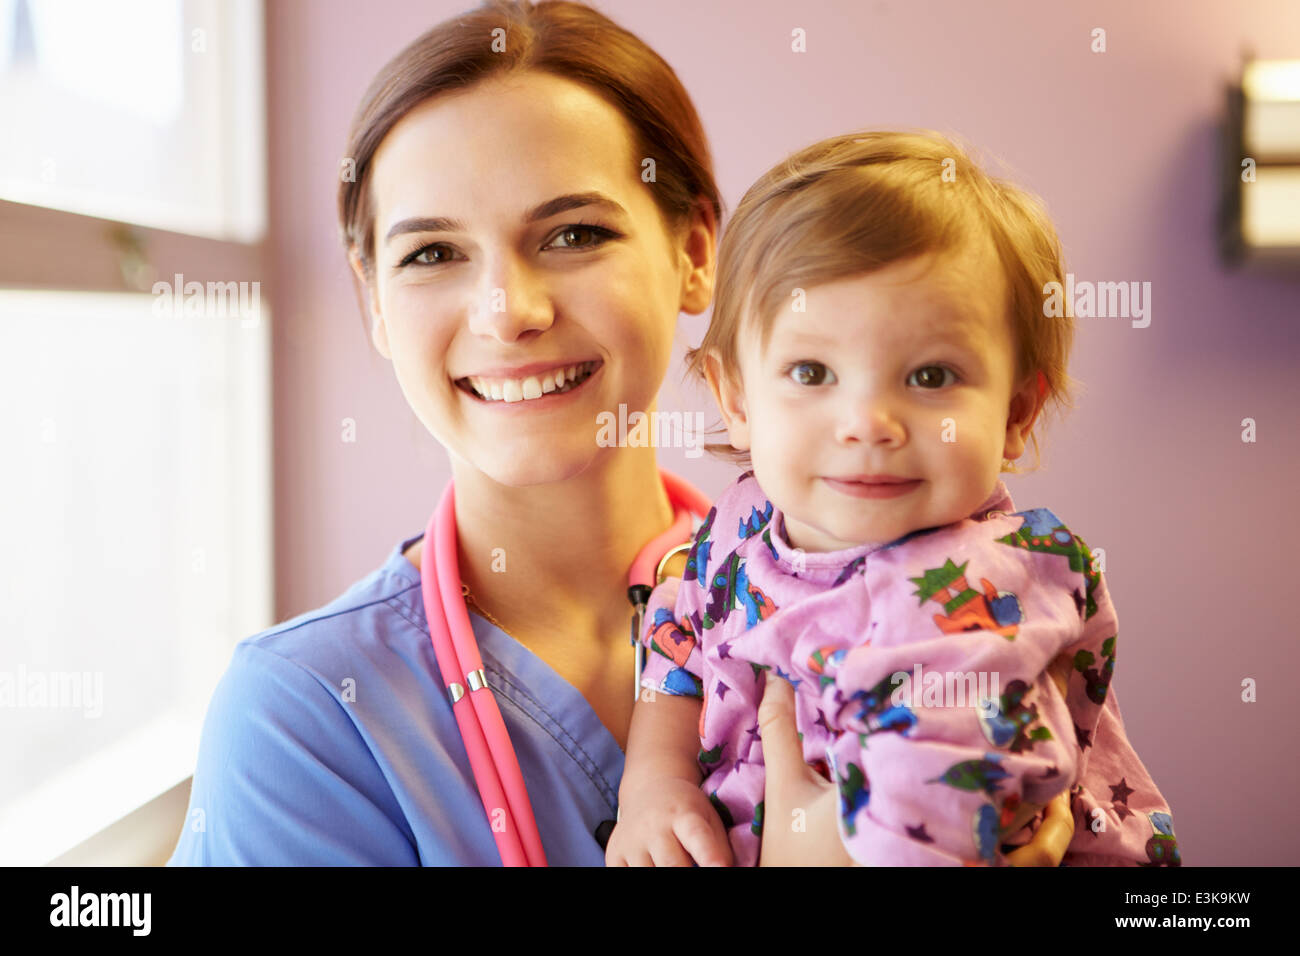 Young Girl Being Held By Female Pediatric Nurse Stock Photo